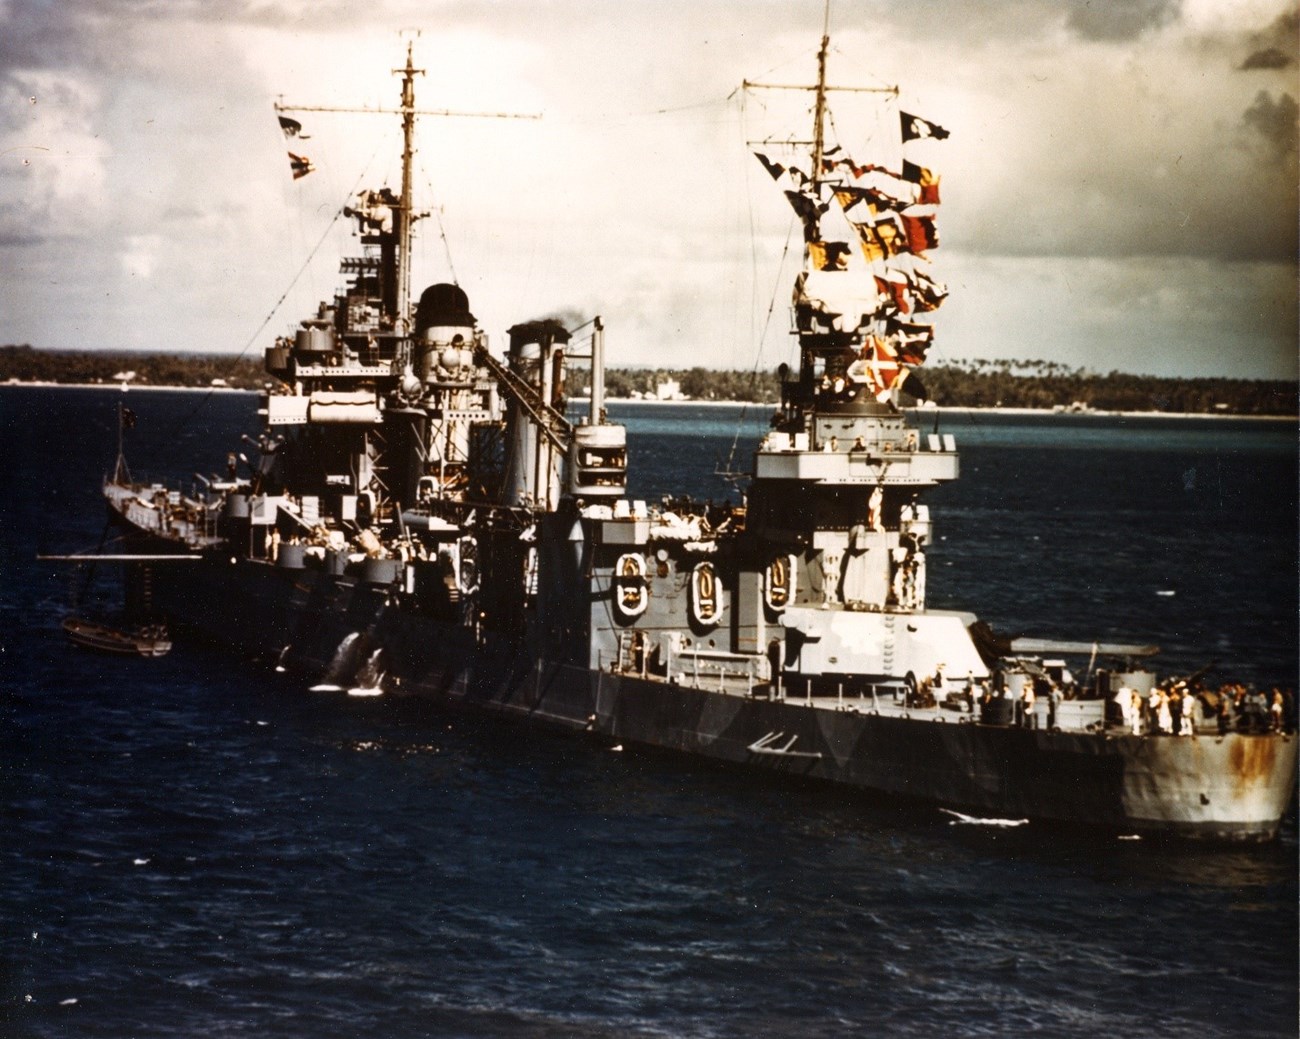 Massachusetts-built USS QUINCY in New Caledonia on the eve of the Guadalcanal invasion, August 3rd, 1942.